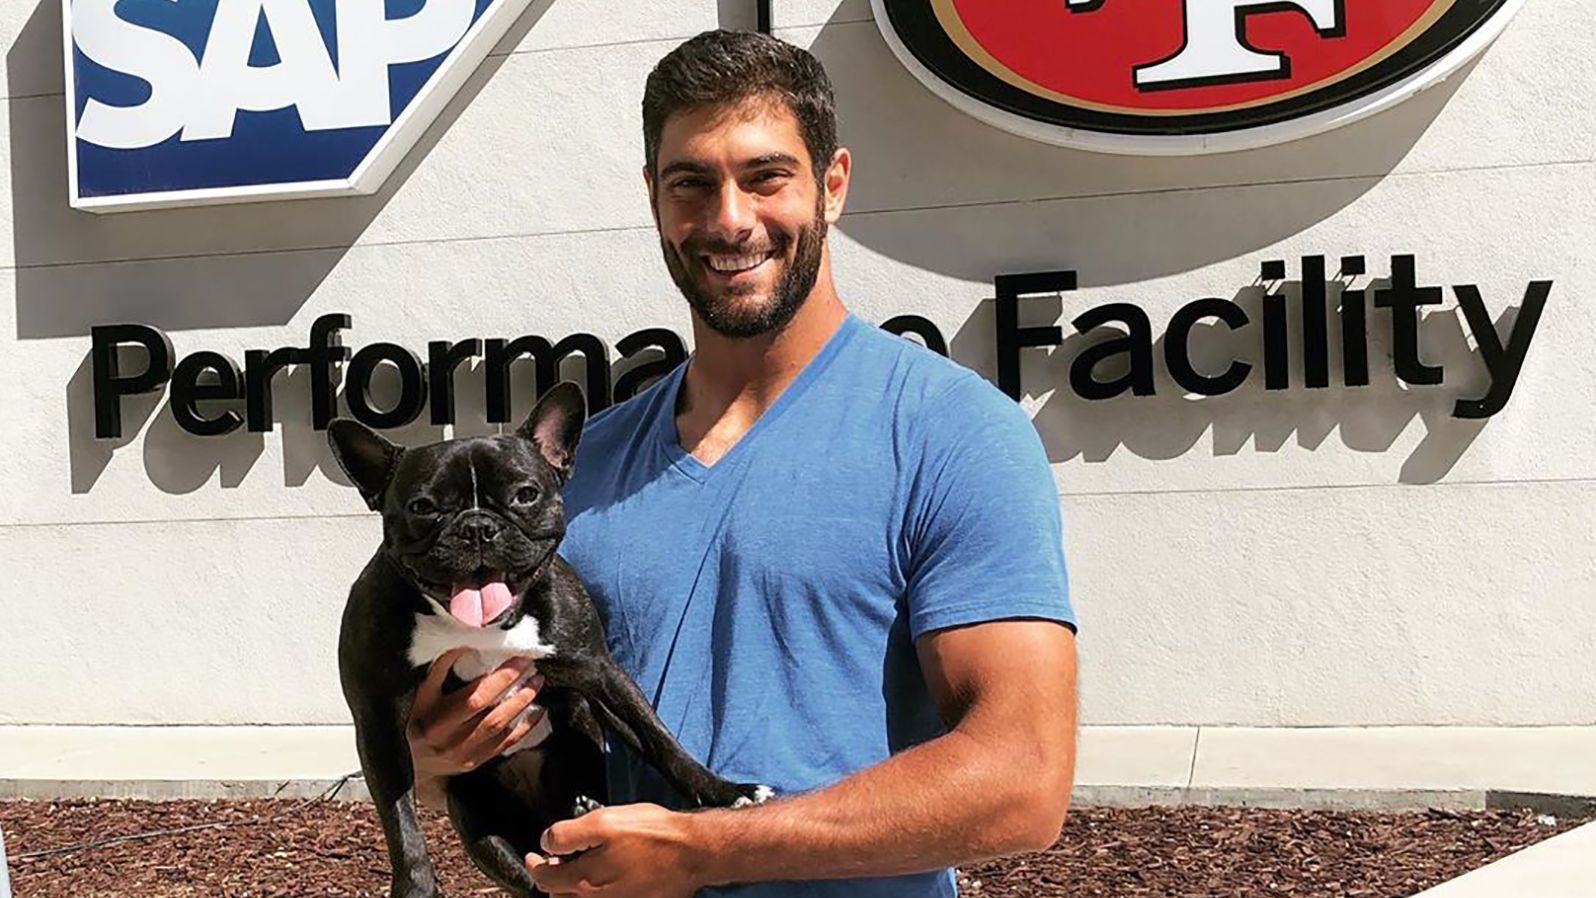 Quarterback Jimmy Garoppolo hangs with Zoë at the Niner's training facility.